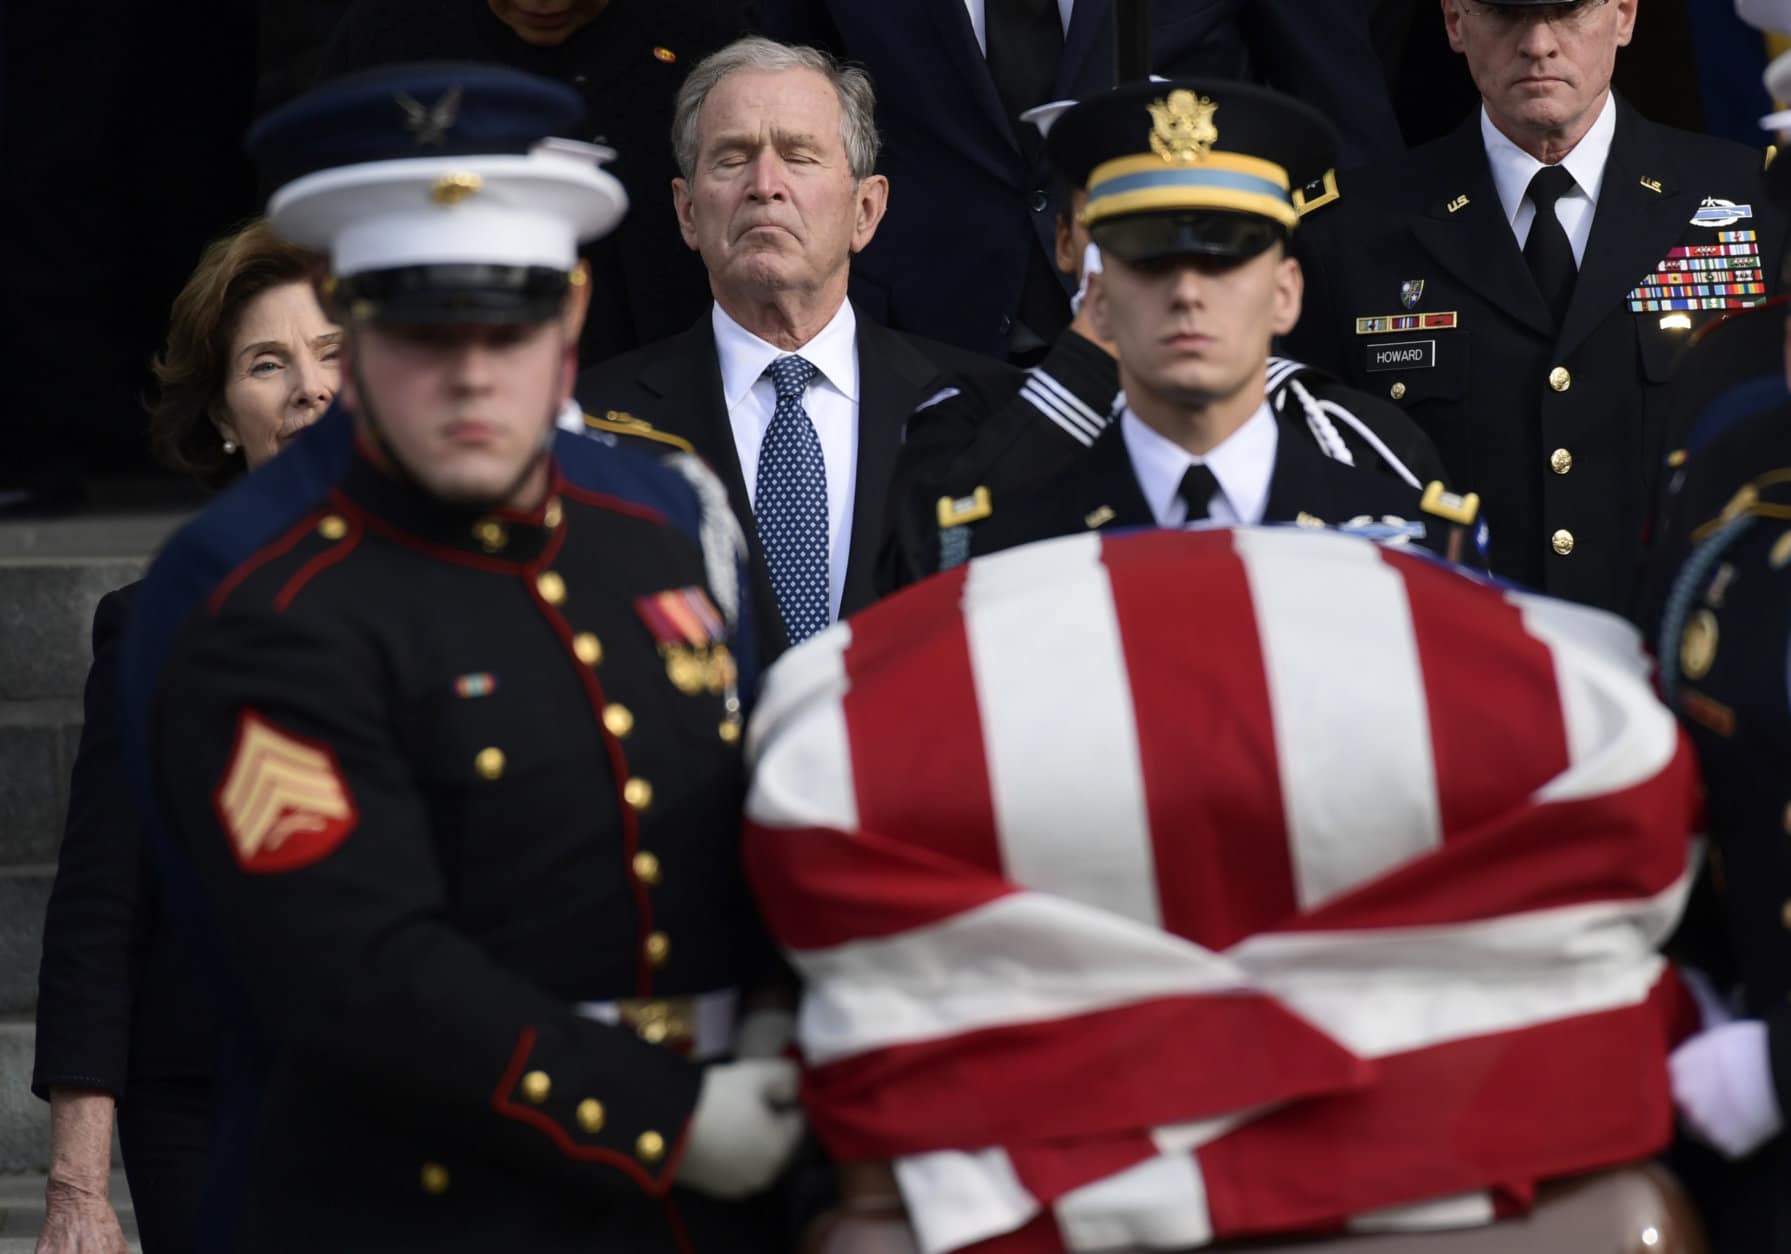 Former President George W. Bush and former first lady Laura Bush, left, follow the casket of former President George H.W. Bush as it is carried out following a State Funeral at the National Cathedral in Washington, Wednesday, Dec. 5, 2018.(AP Photo/Susan Walsh)